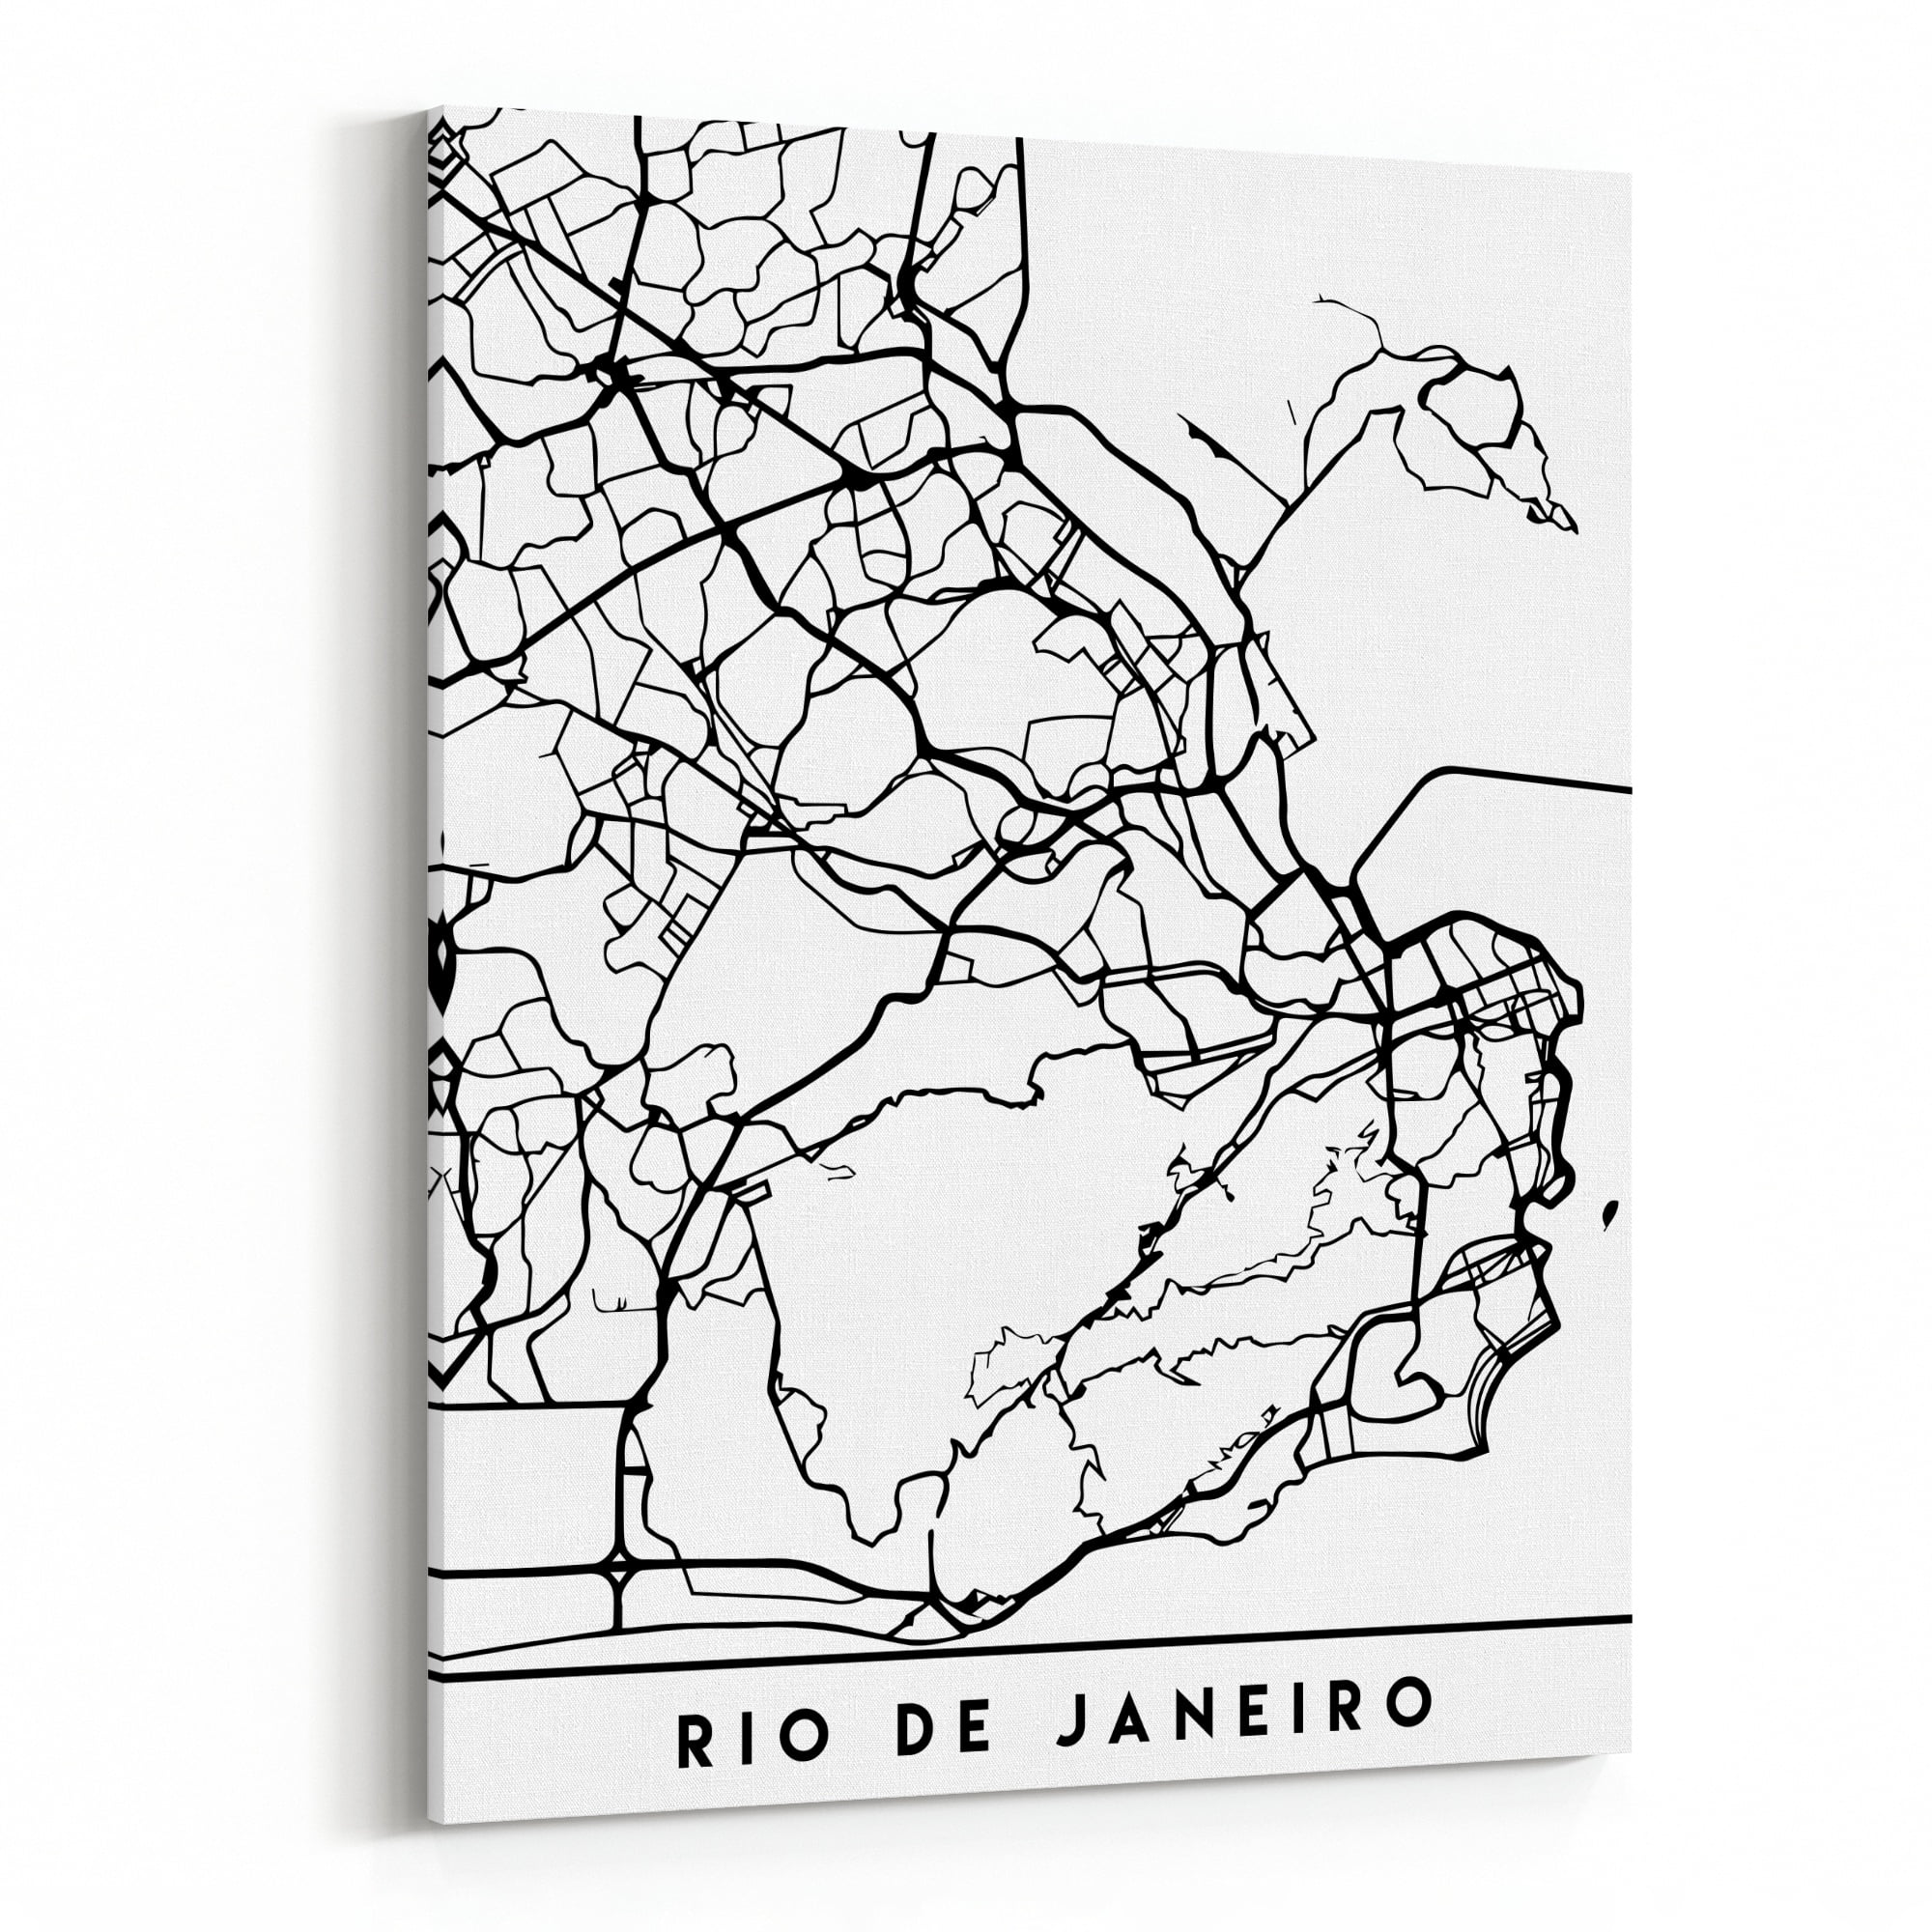 RIO DE JANEIRO Brazil Canvas Map Art Deco Style Large Horizontal Map Canvas Print Wall Art Ready for Hanging Black White Blue Map Poster